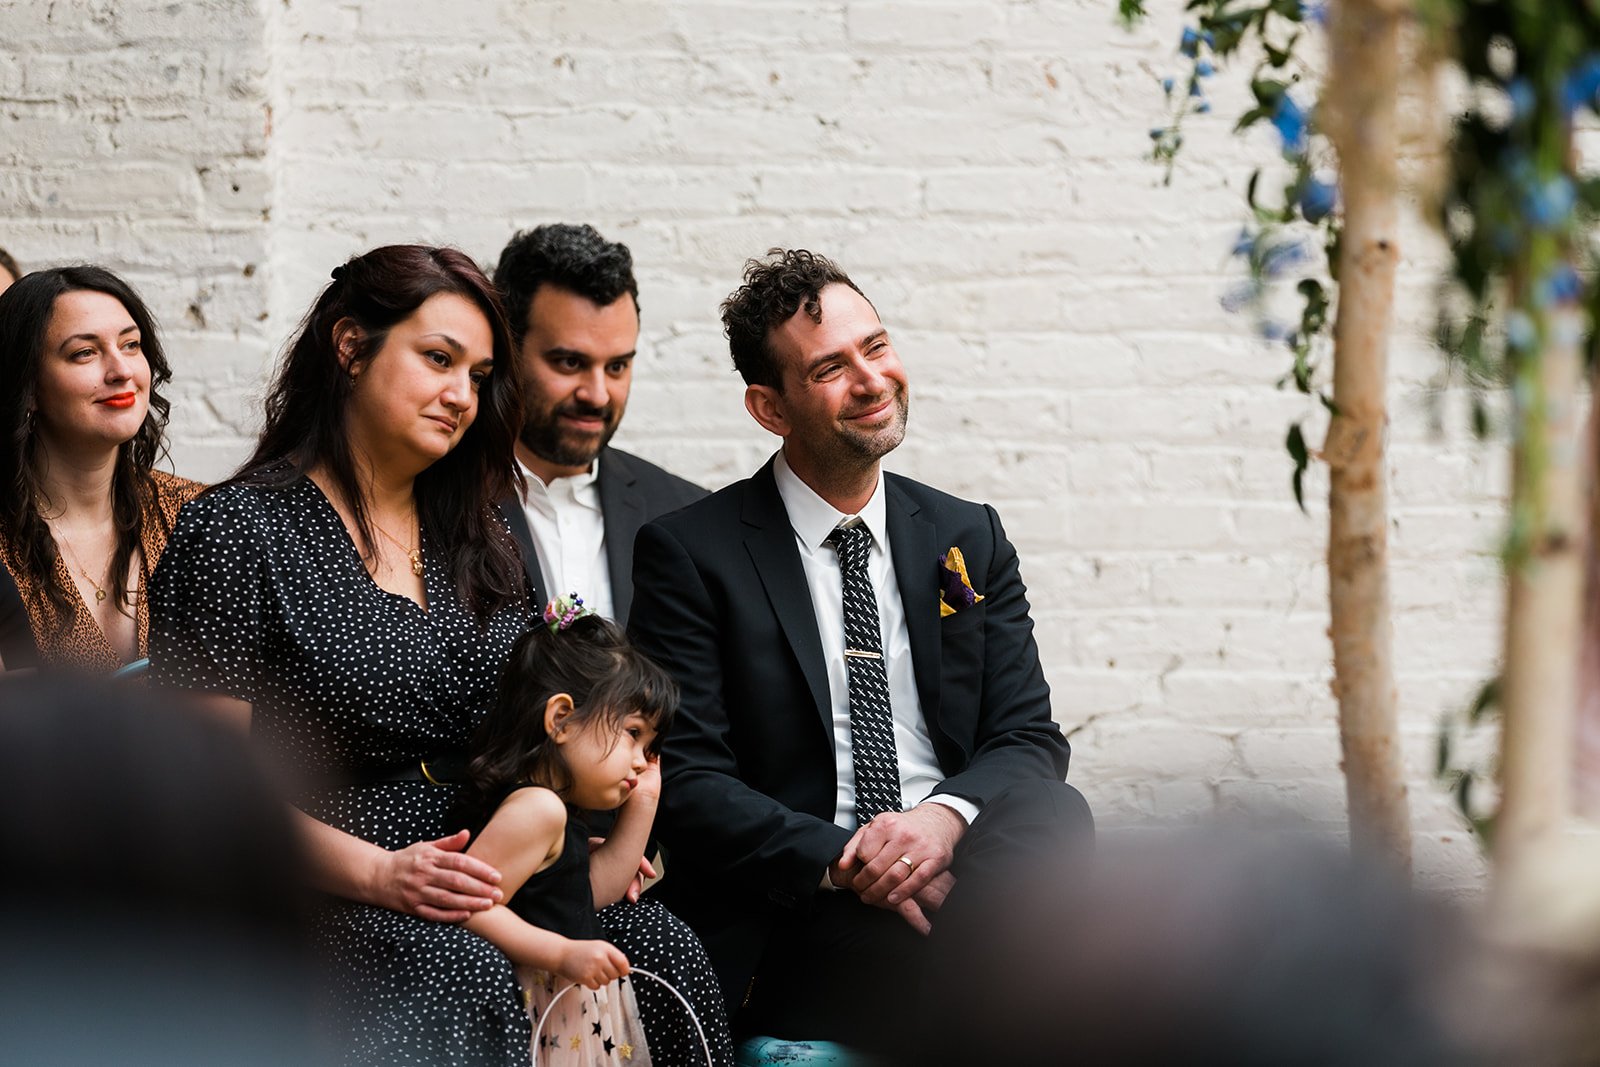  Candid, documentary photo of guests emotionally reacting to the bride and groom during their nontraditional Jewish and Venezuelan wedding ceremony in the round at The Joinery Chicago an Industrial loft wedding venue In Logan Square. 